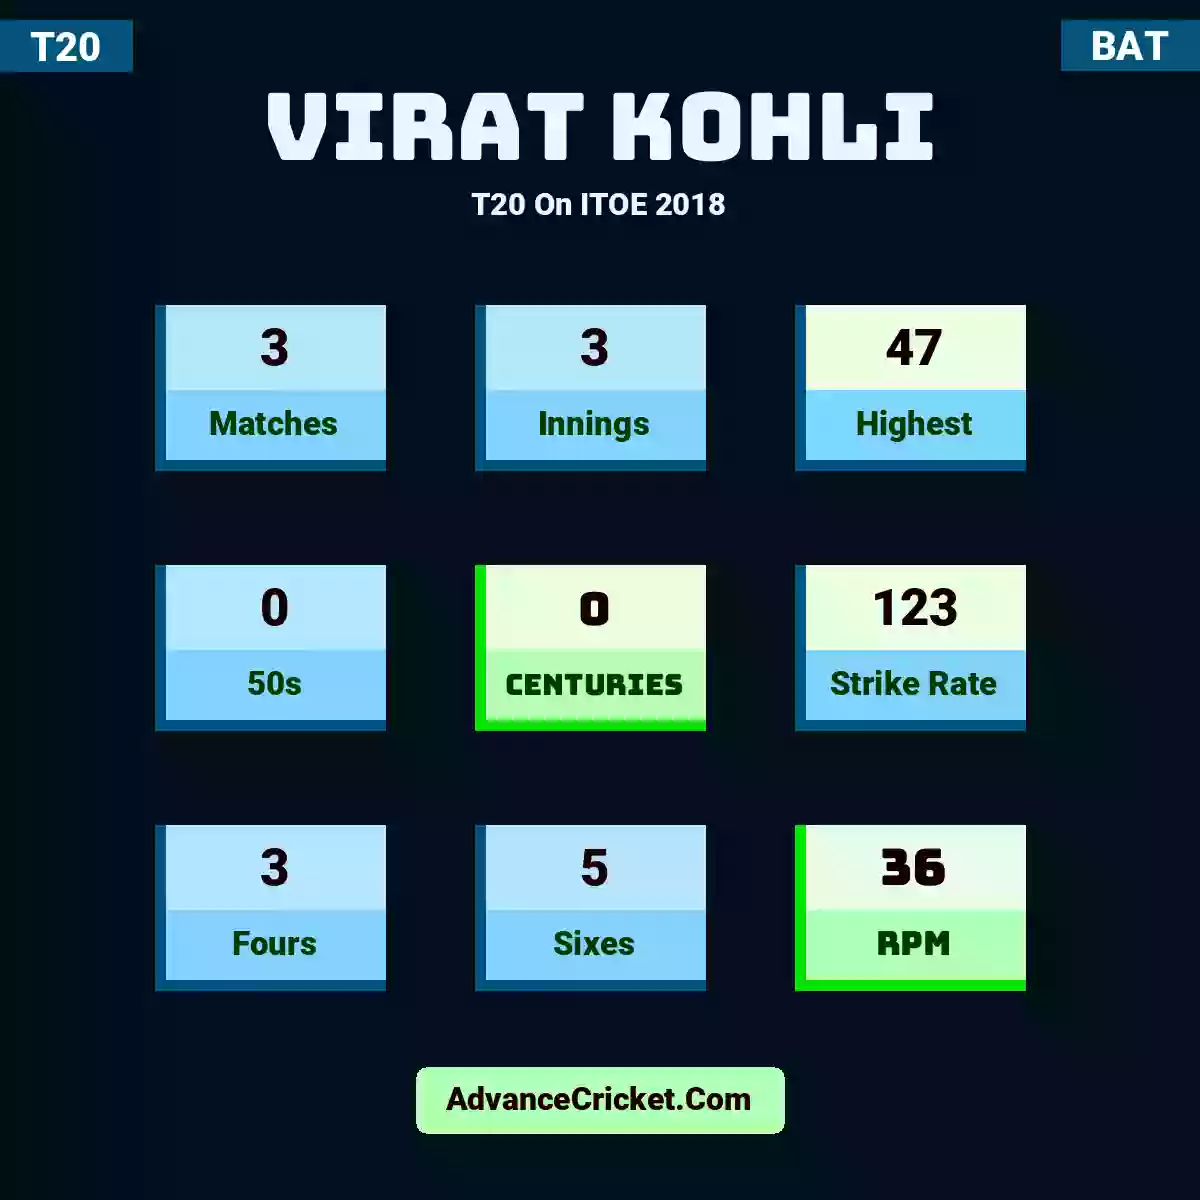 Virat Kohli T20  On ITOE 2018, Virat Kohli played 3 matches, scored 47 runs as highest, 0 half-centuries, and 0 centuries, with a strike rate of 123. V.Kohli hit 3 fours and 5 sixes, with an RPM of 36.